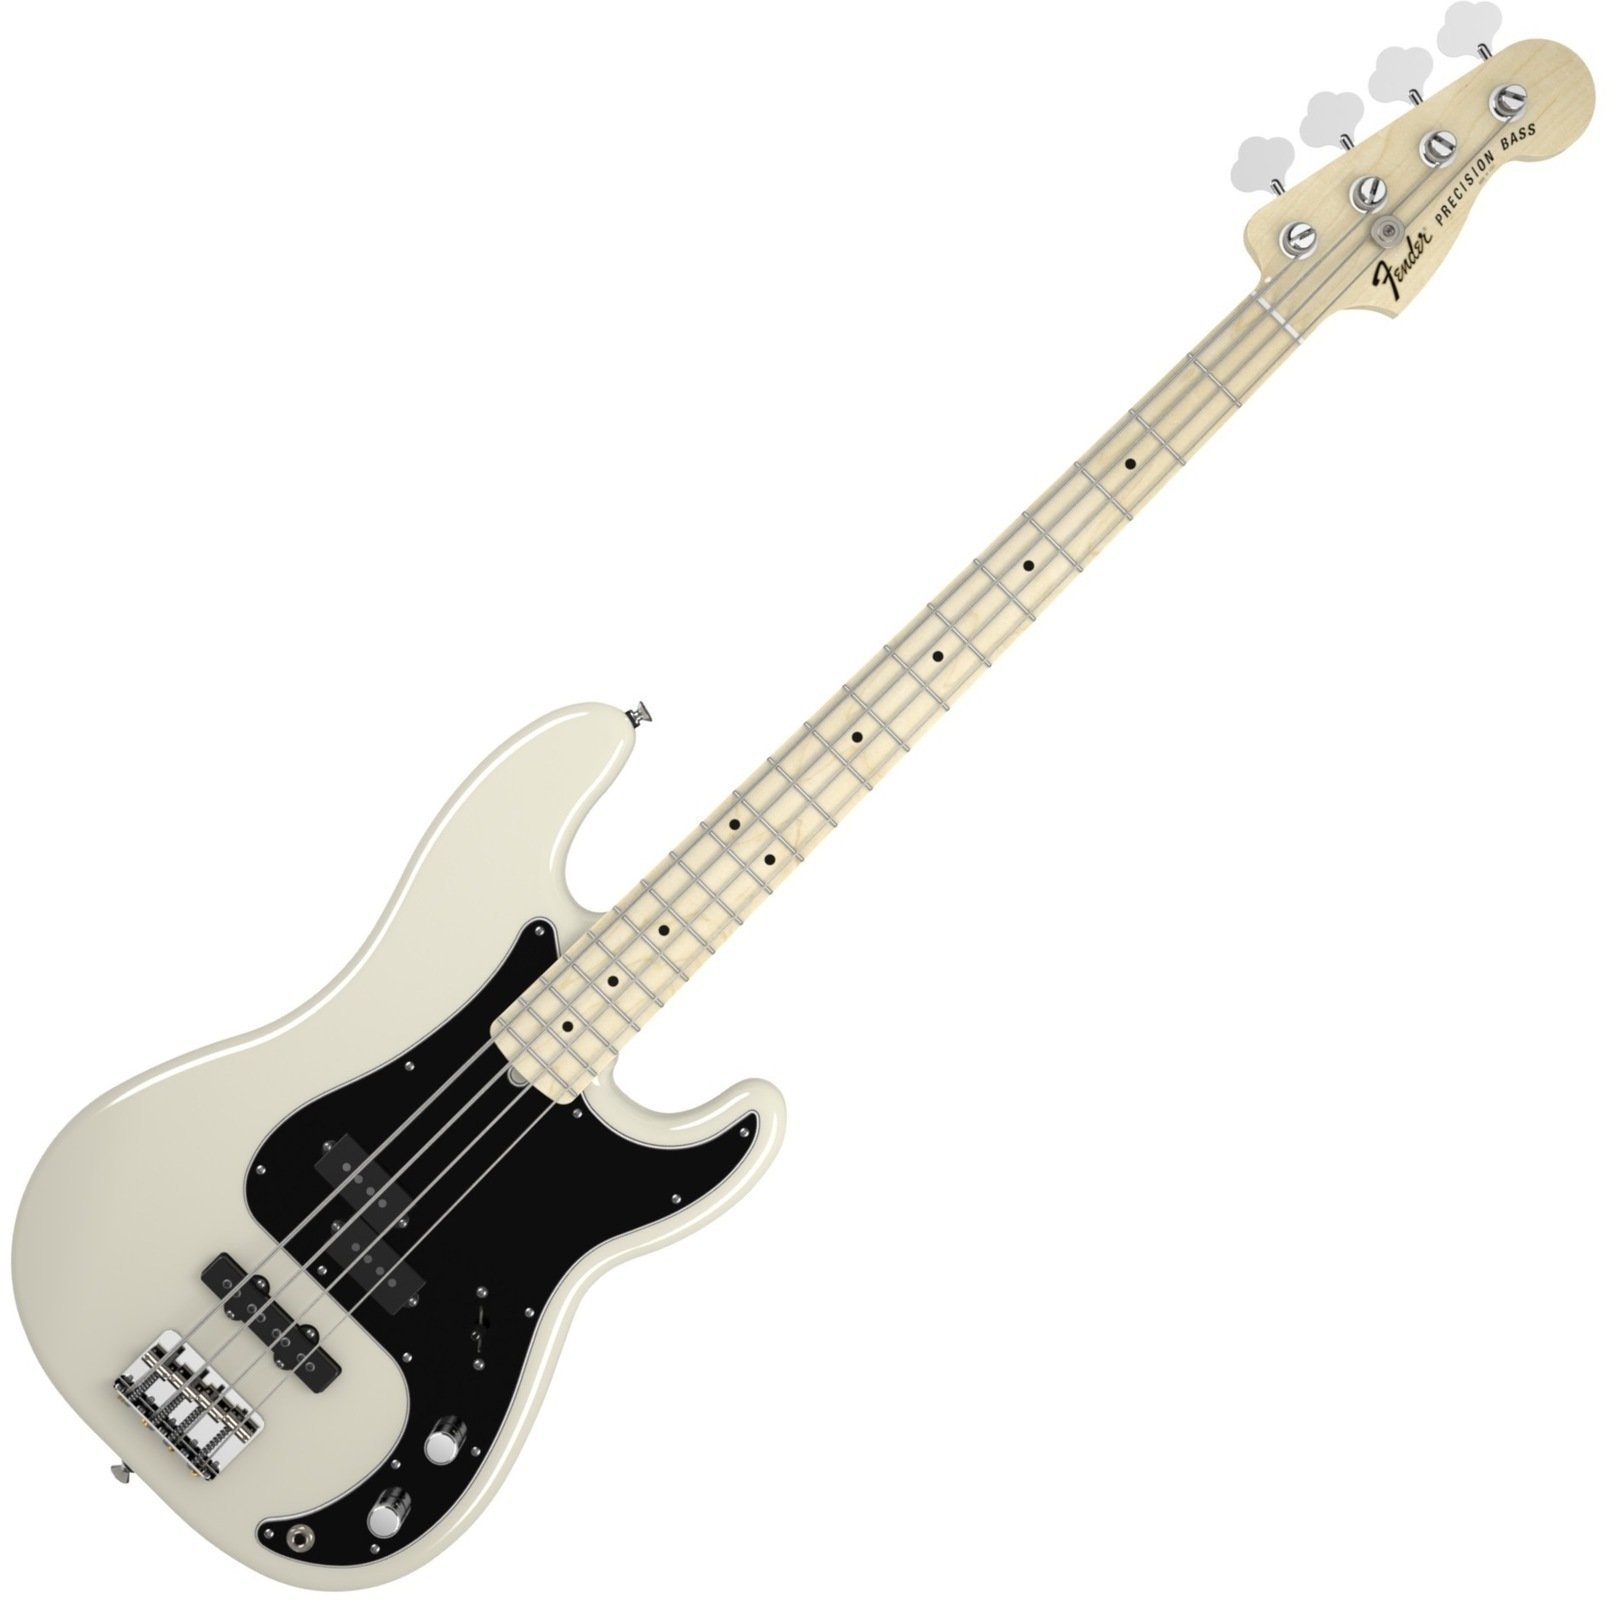 Basse électrique Fender Tony Franklin Fretted Precision Bass Maple Fingerboard, Olympic White